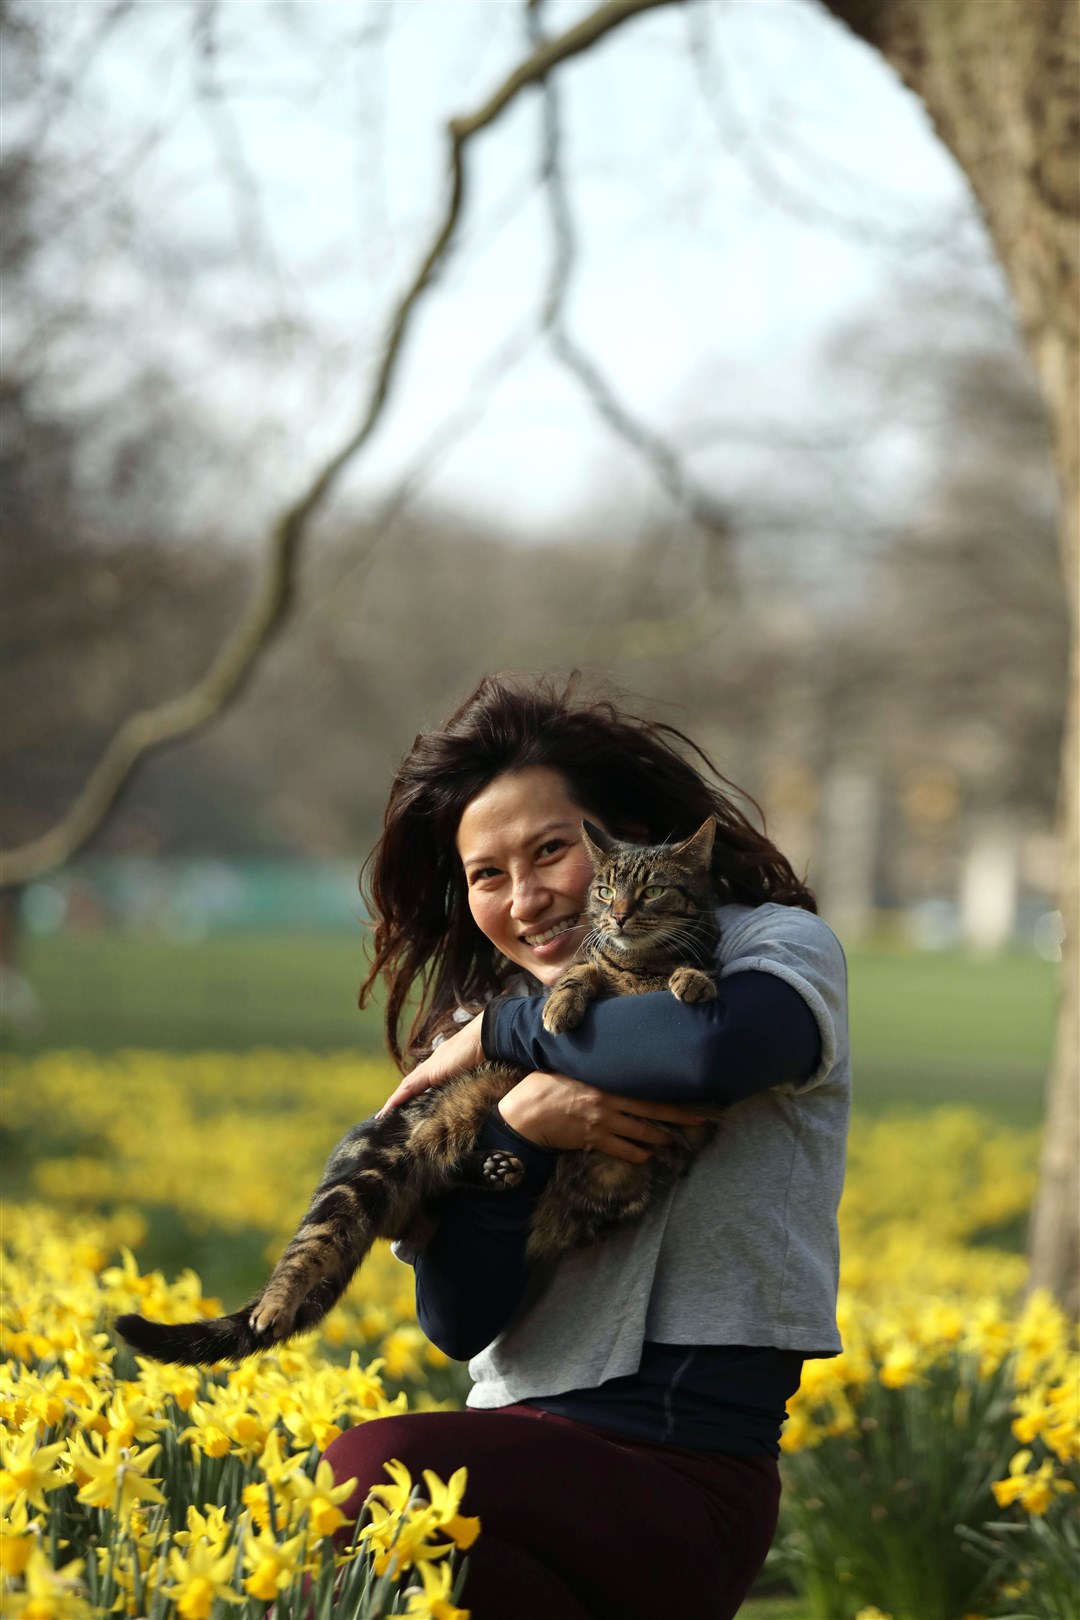 Serena with her cat Chummy among the daffodils in London’s St James’s Park (Luciana Guerra/PA)